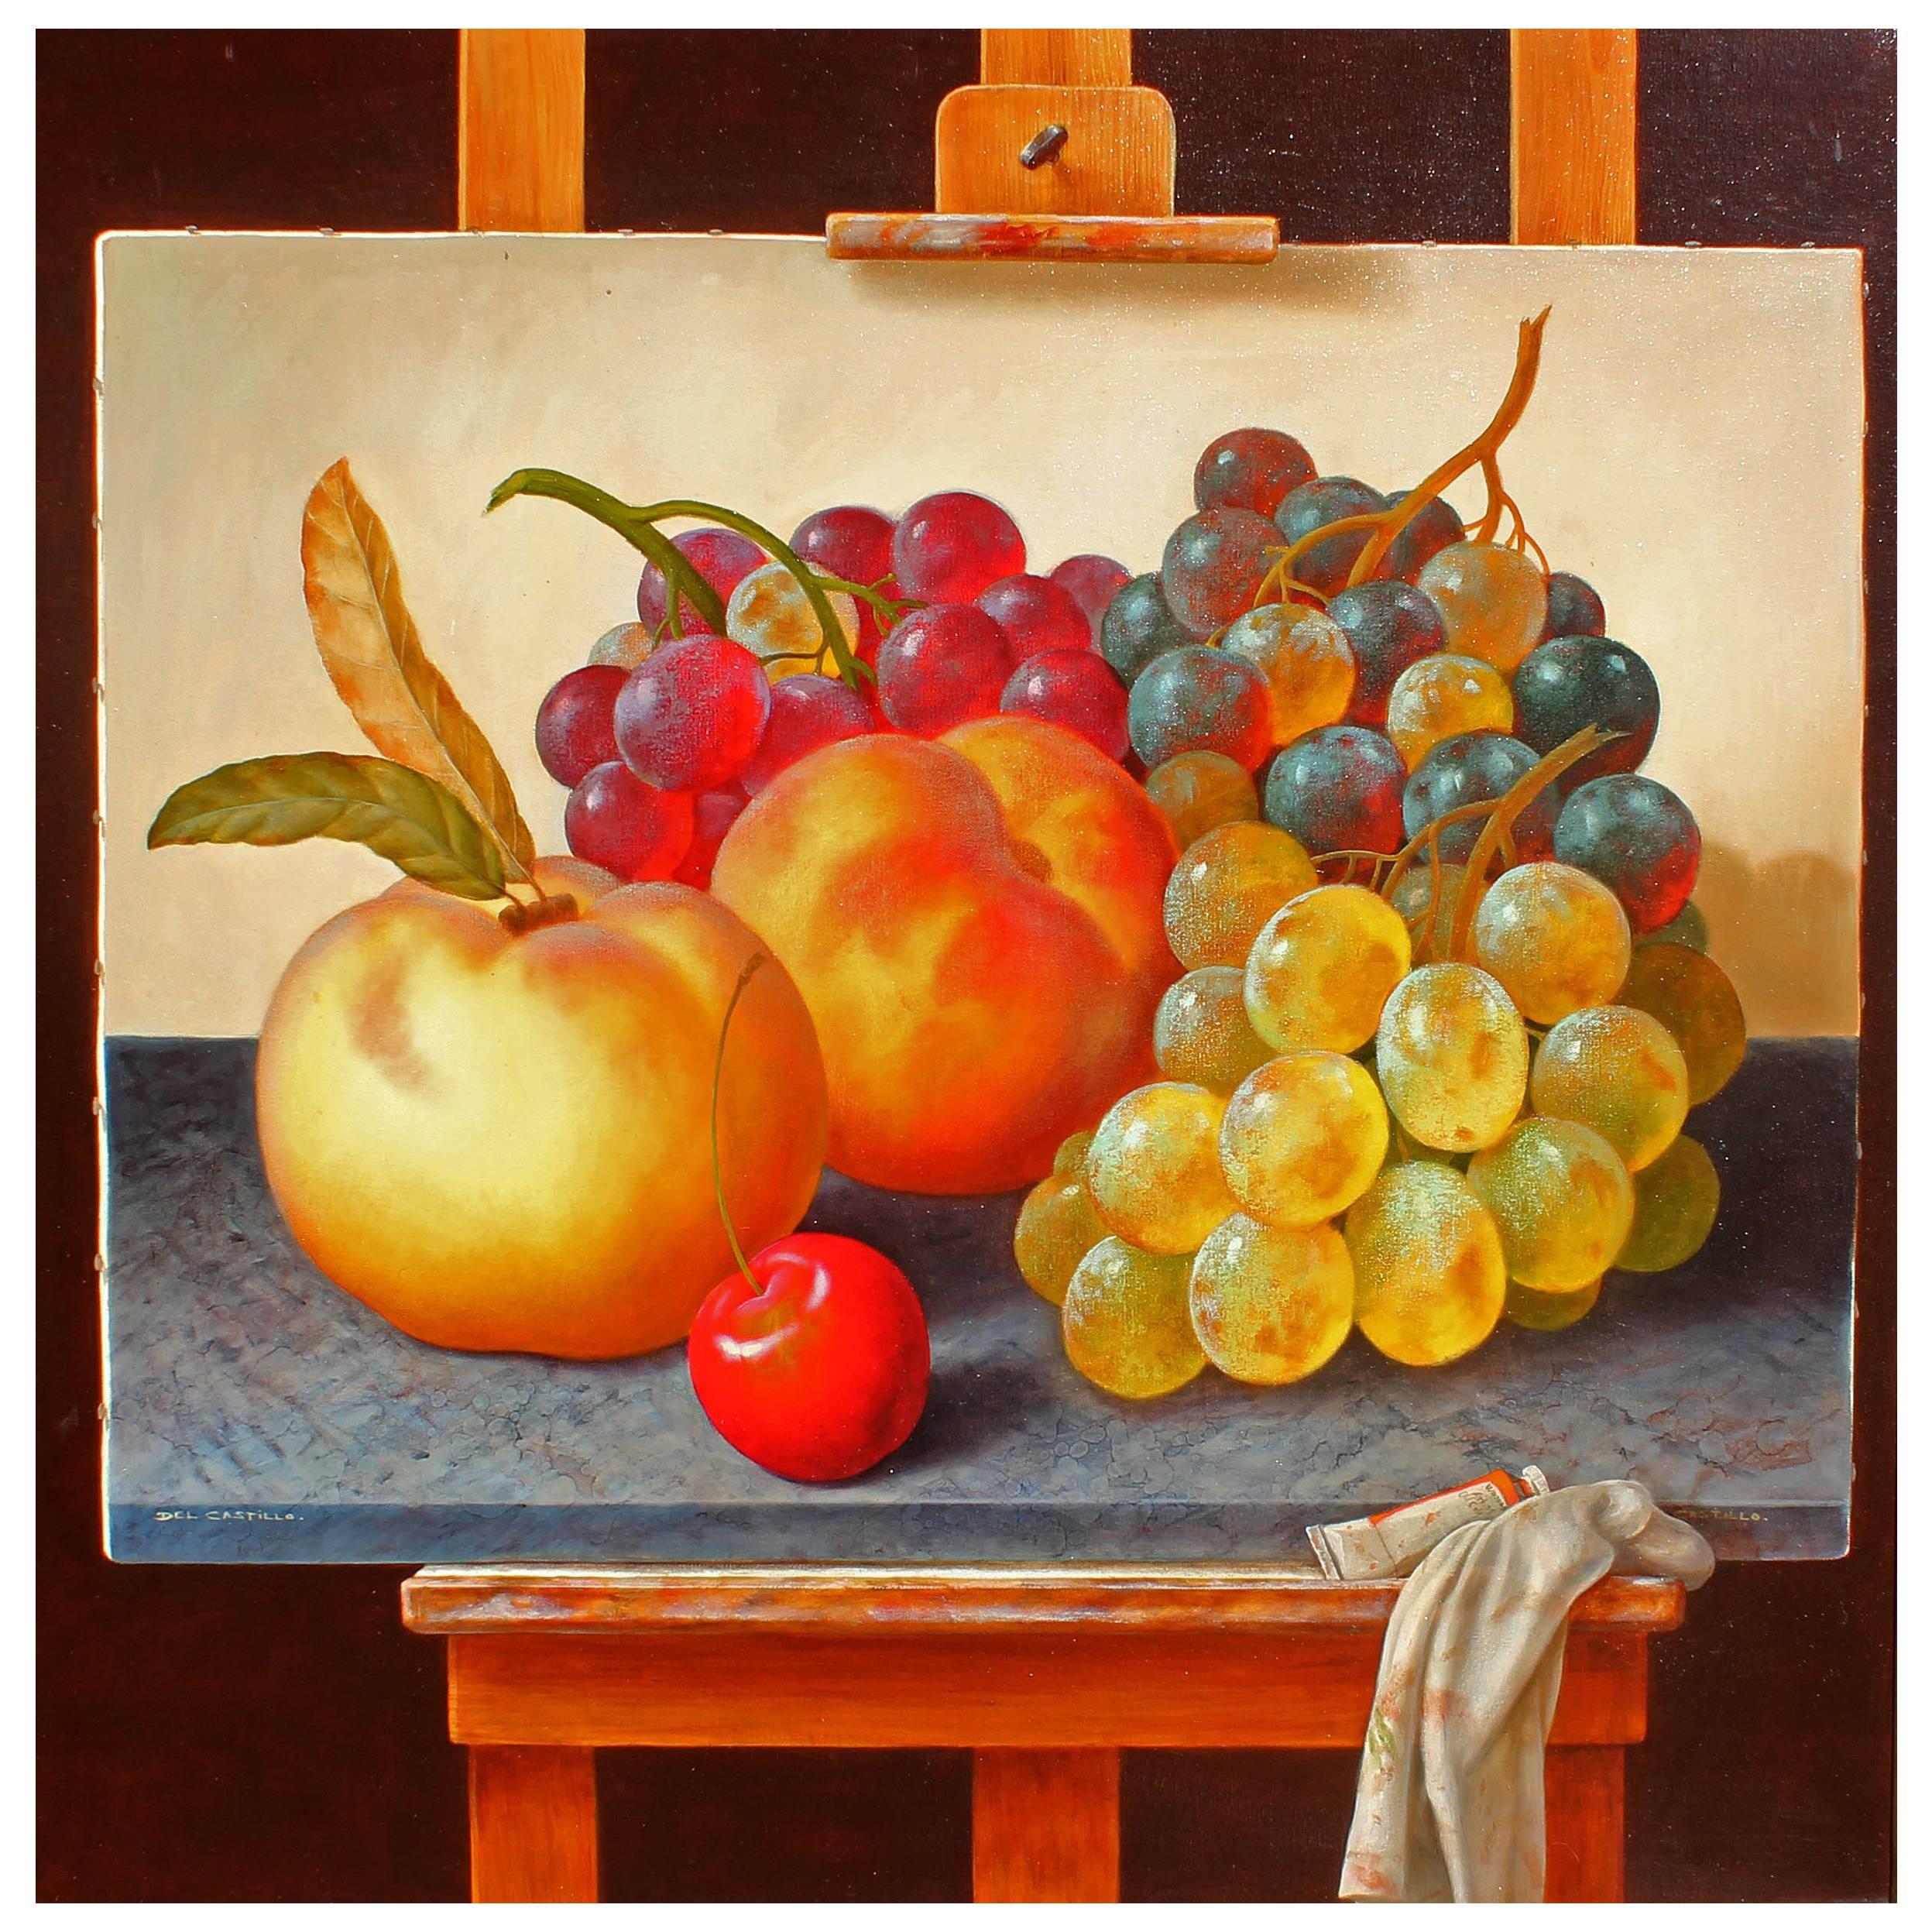 Surreal hyper realistic trompe l'oeil oil painting by Latin American artist Victor Del Castillo. Peaches, grapes and cherries in rich brilliant colors and incredible detail. Measures: Large 41